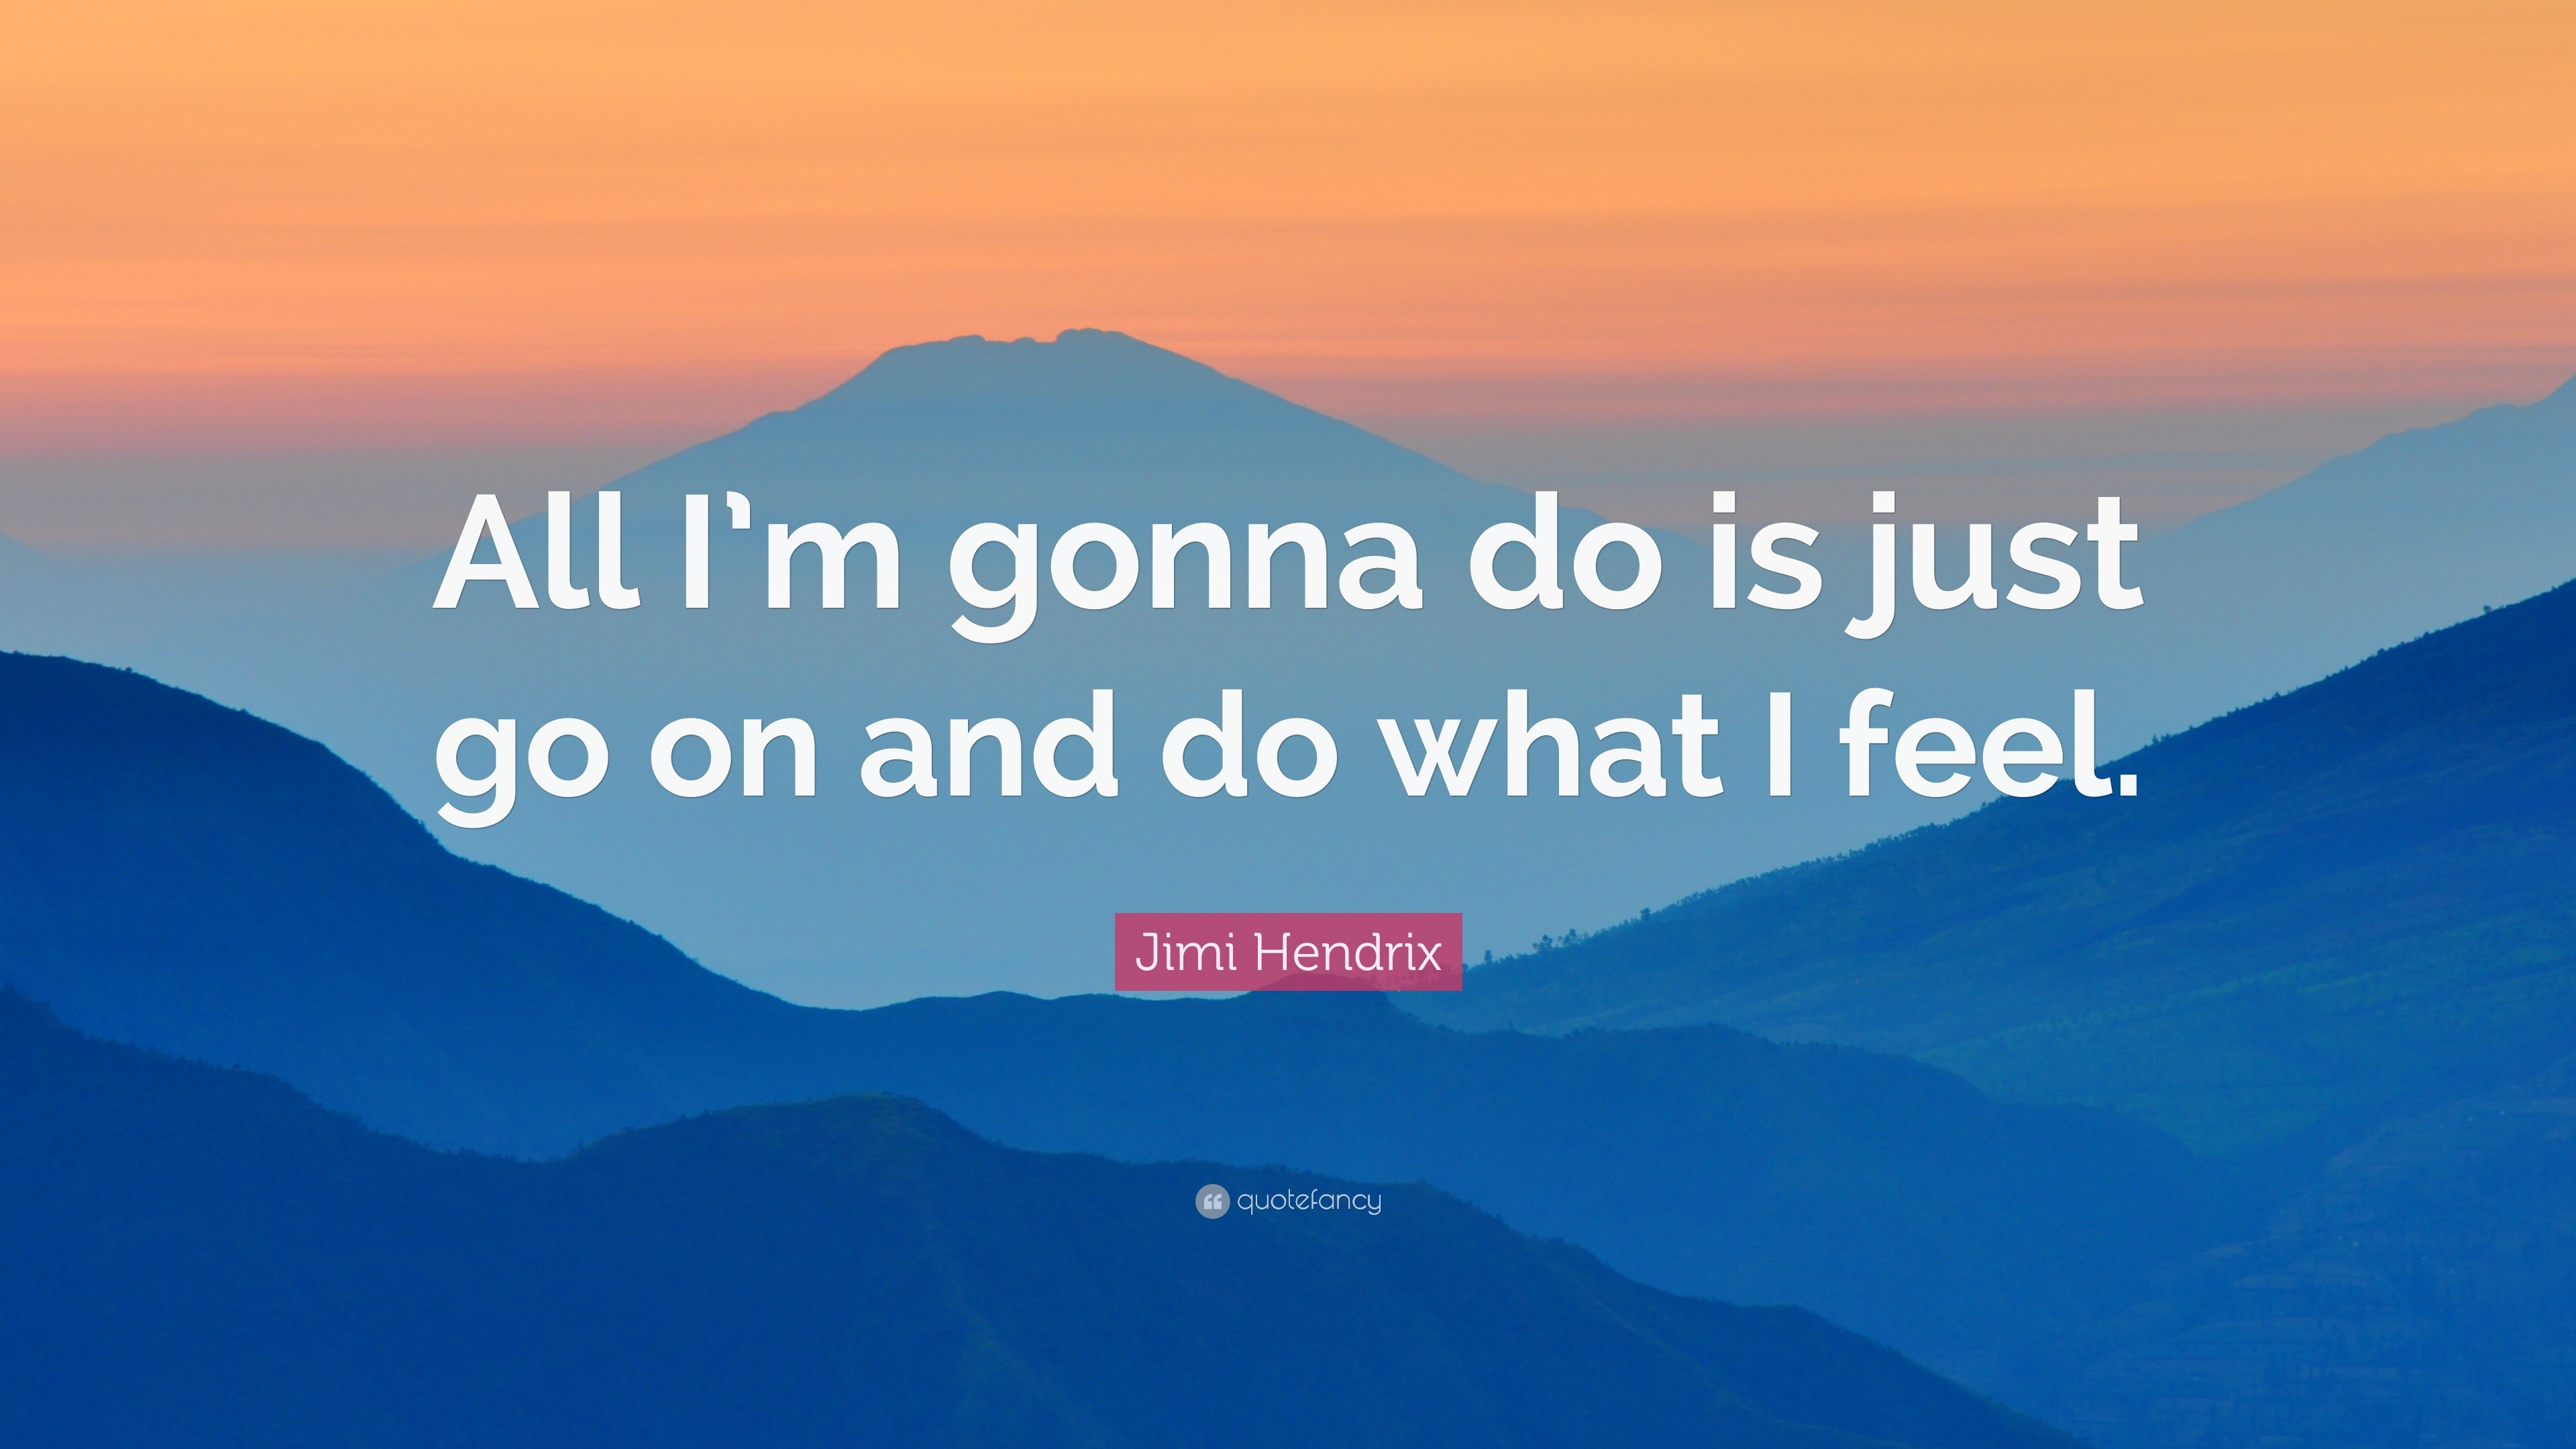 Jimi Hendrix Quote: “All I’m gonna do is just go on and do what I feel.”